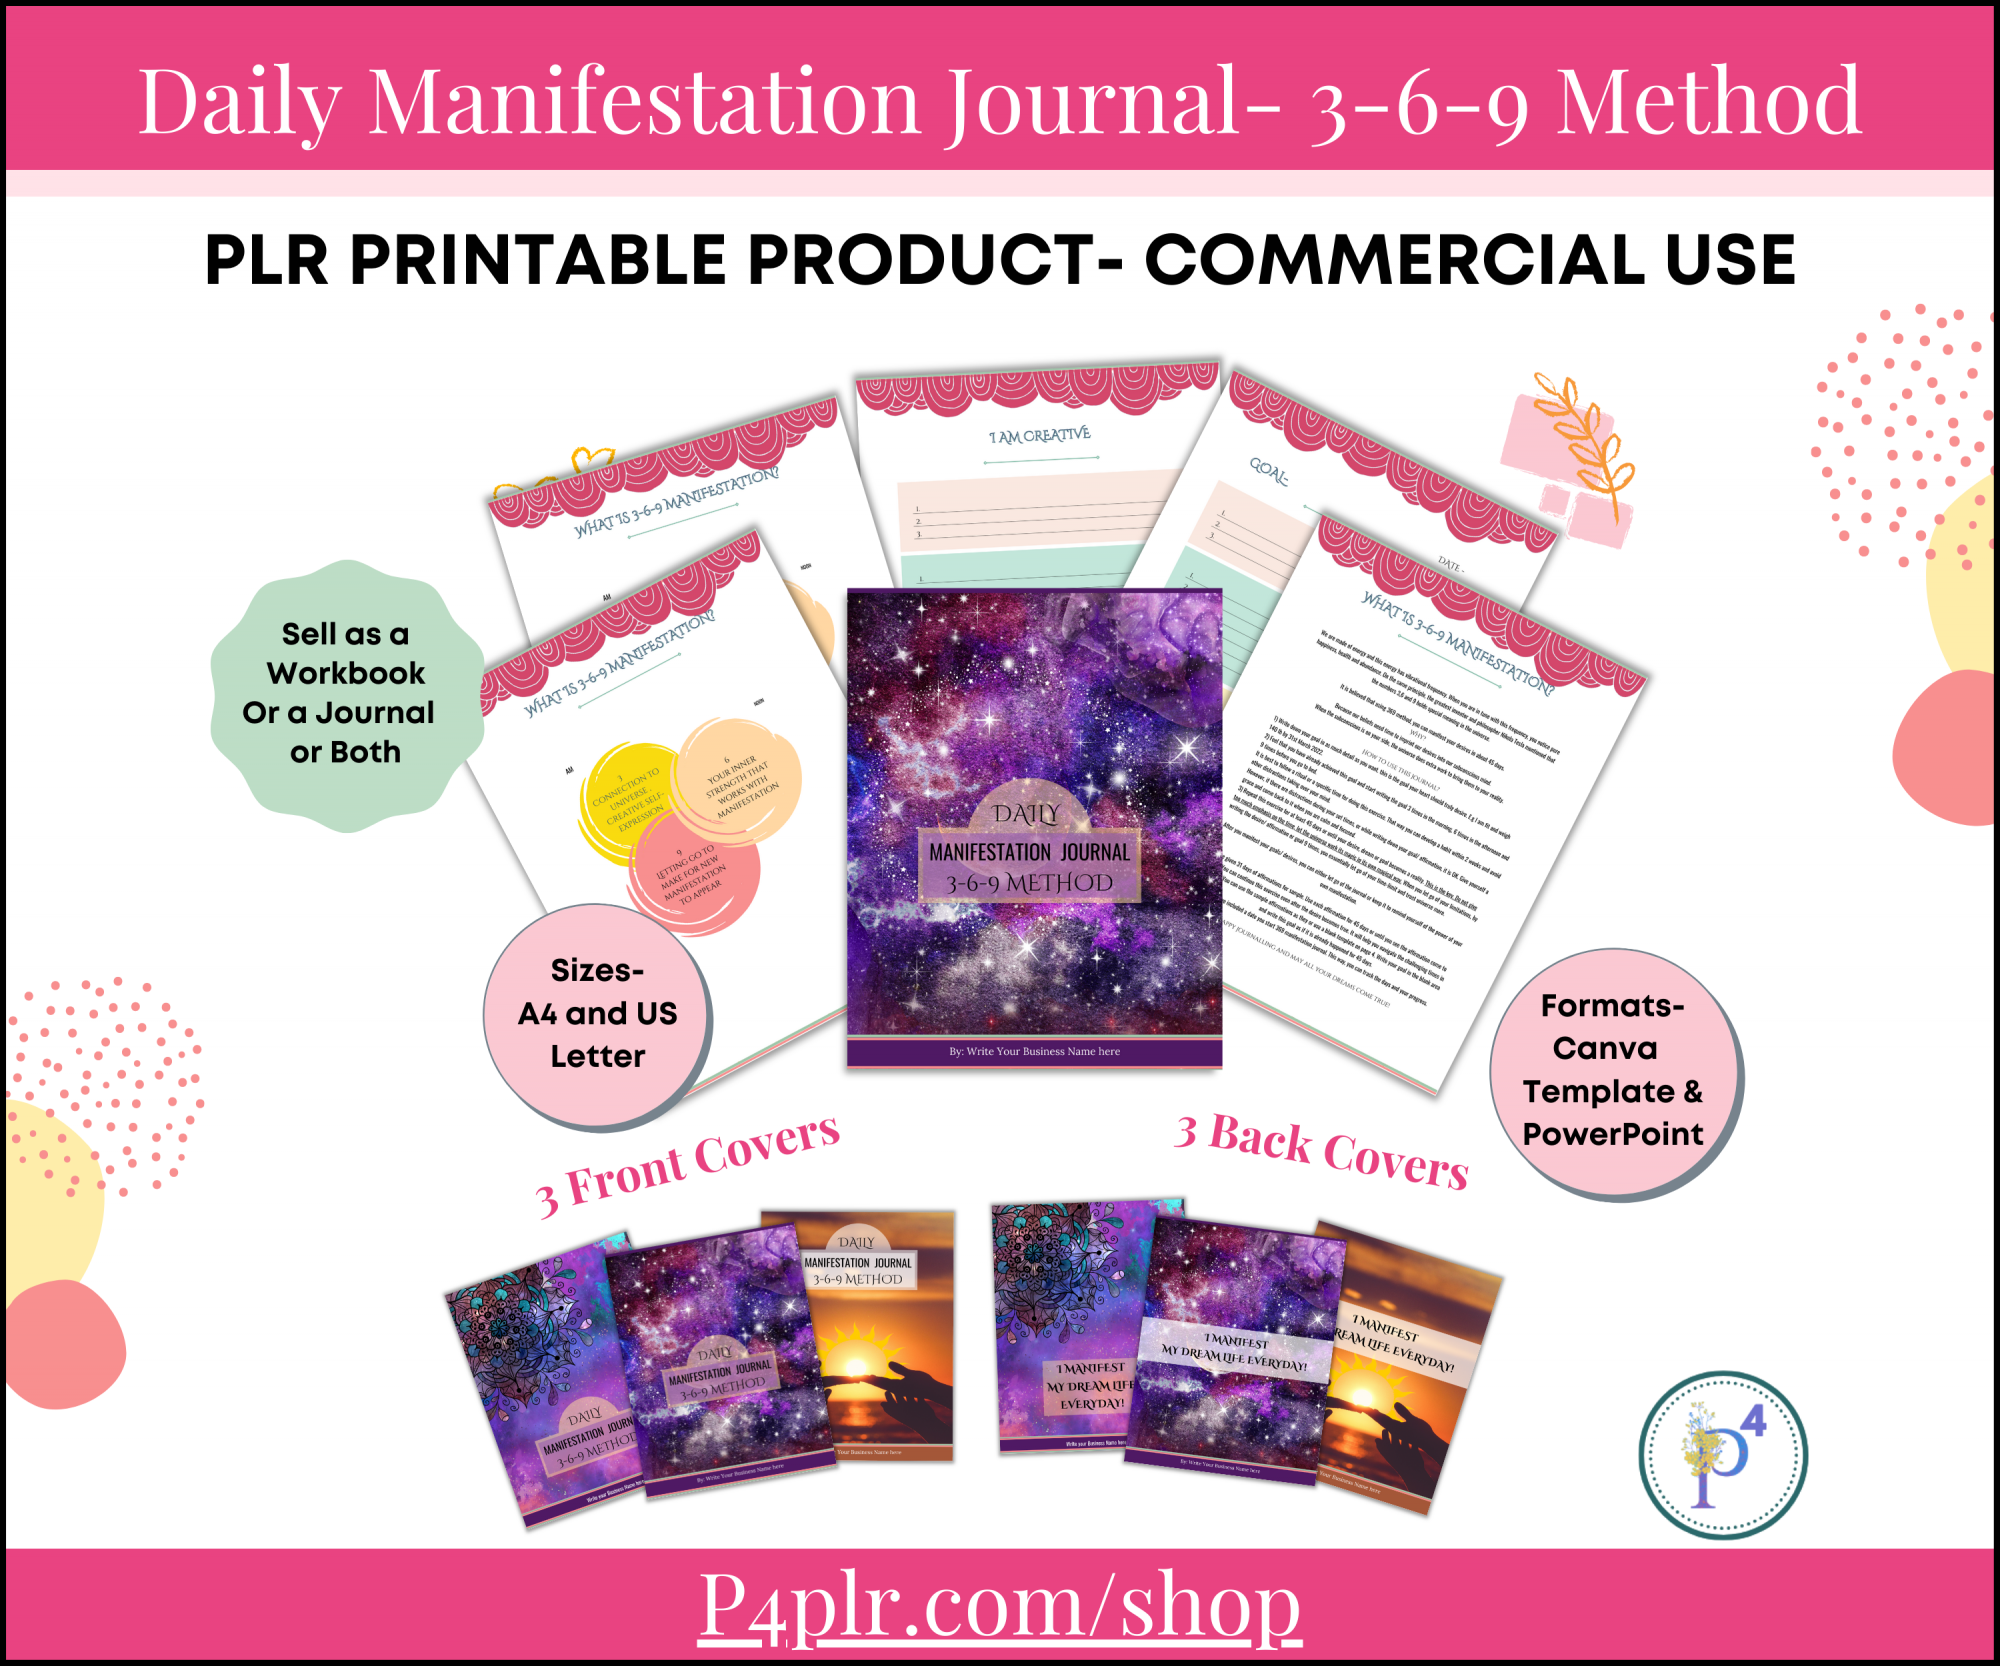 Coloring sheets and Learning Journal PLR Printables showing internal pages for a customisable planner